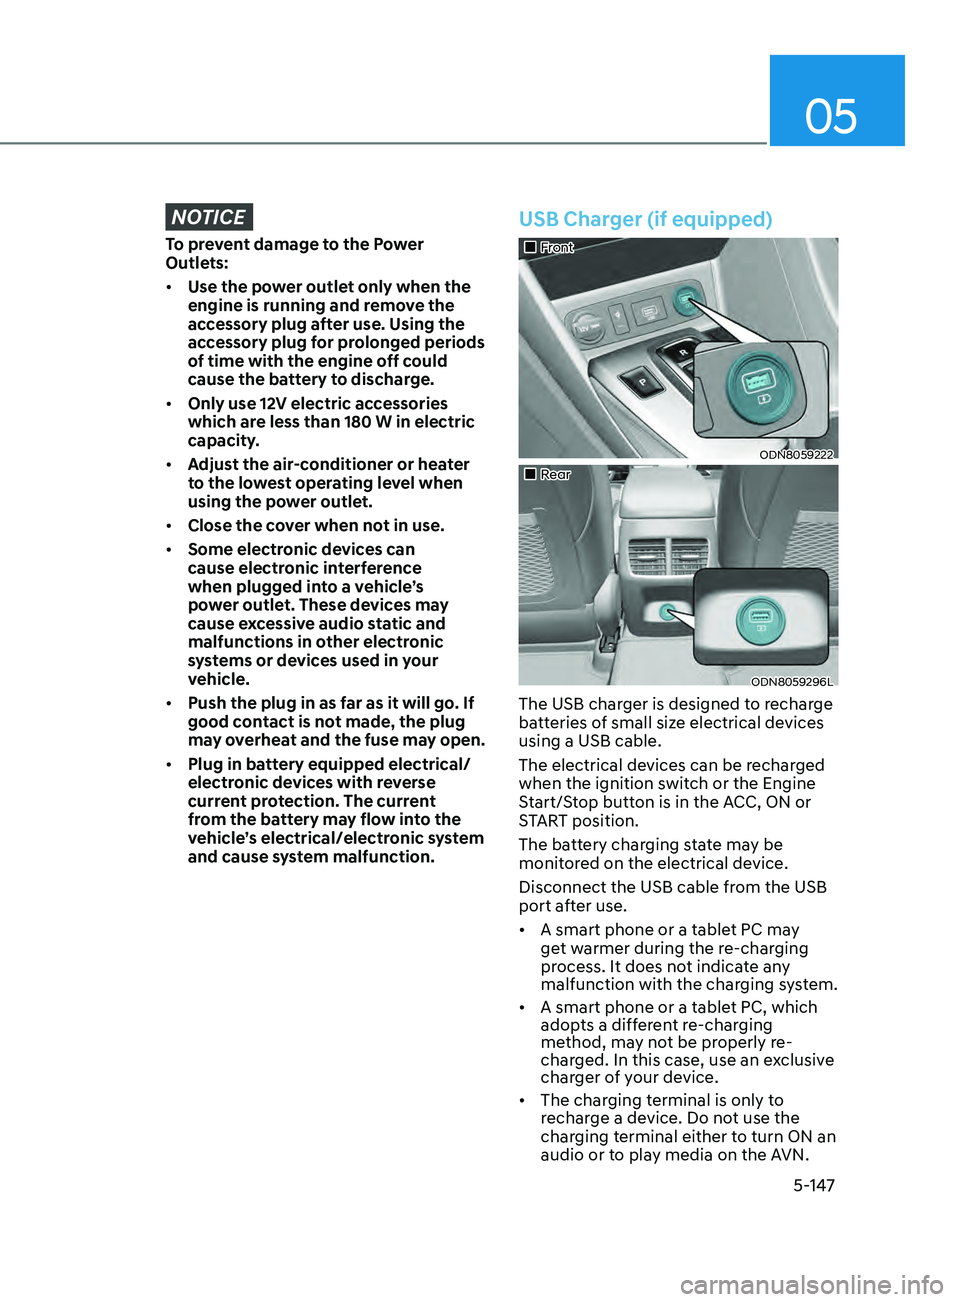 HYUNDAI SONATA 2021  Owners Manual 05
5-147
NOTICE
To prevent damage to the Power 
Outlets:
•	Use the power outlet only when the 
engine is running and remove the 
accessory plug after use. Using the 
accessory plug for prolonged per